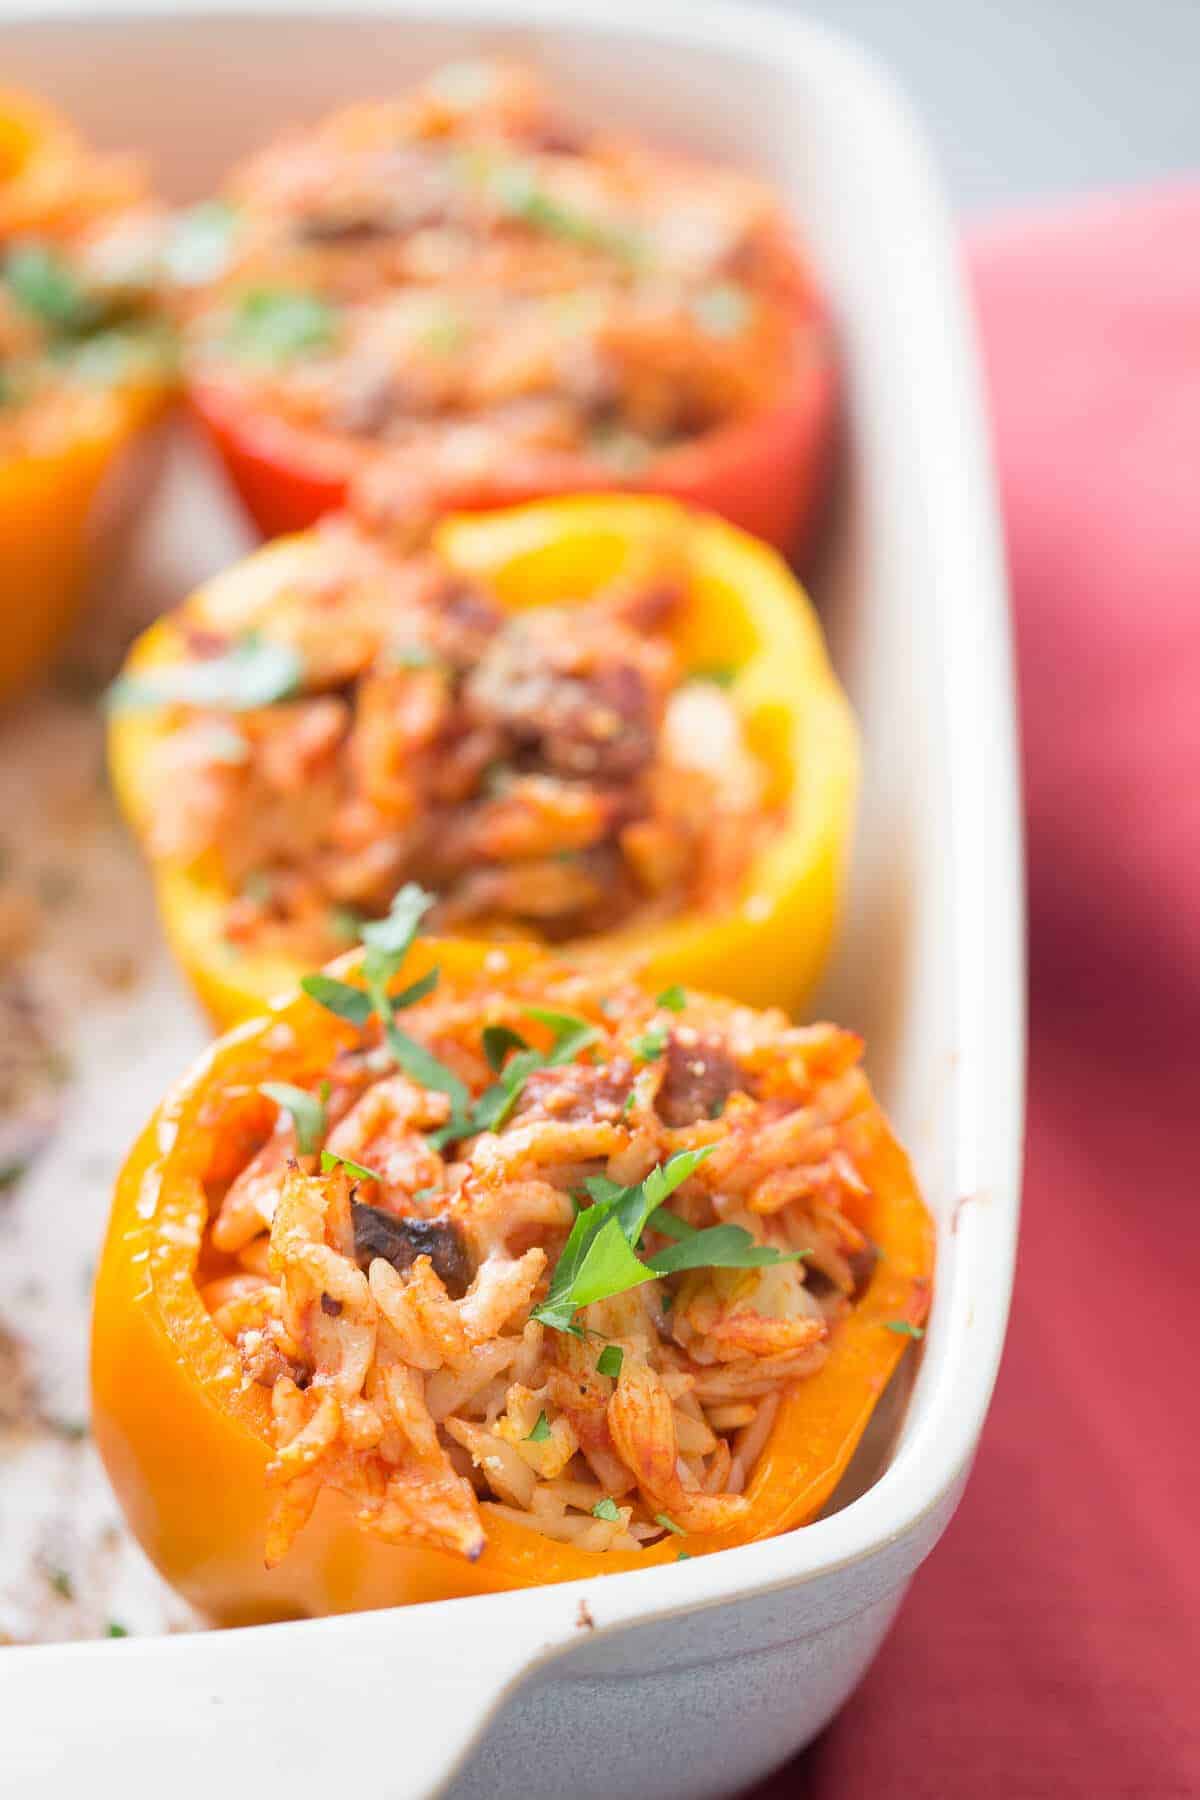 Italian stuffed pepper are going to wow your family! They are filled with sausage and pasta; everything kids love!